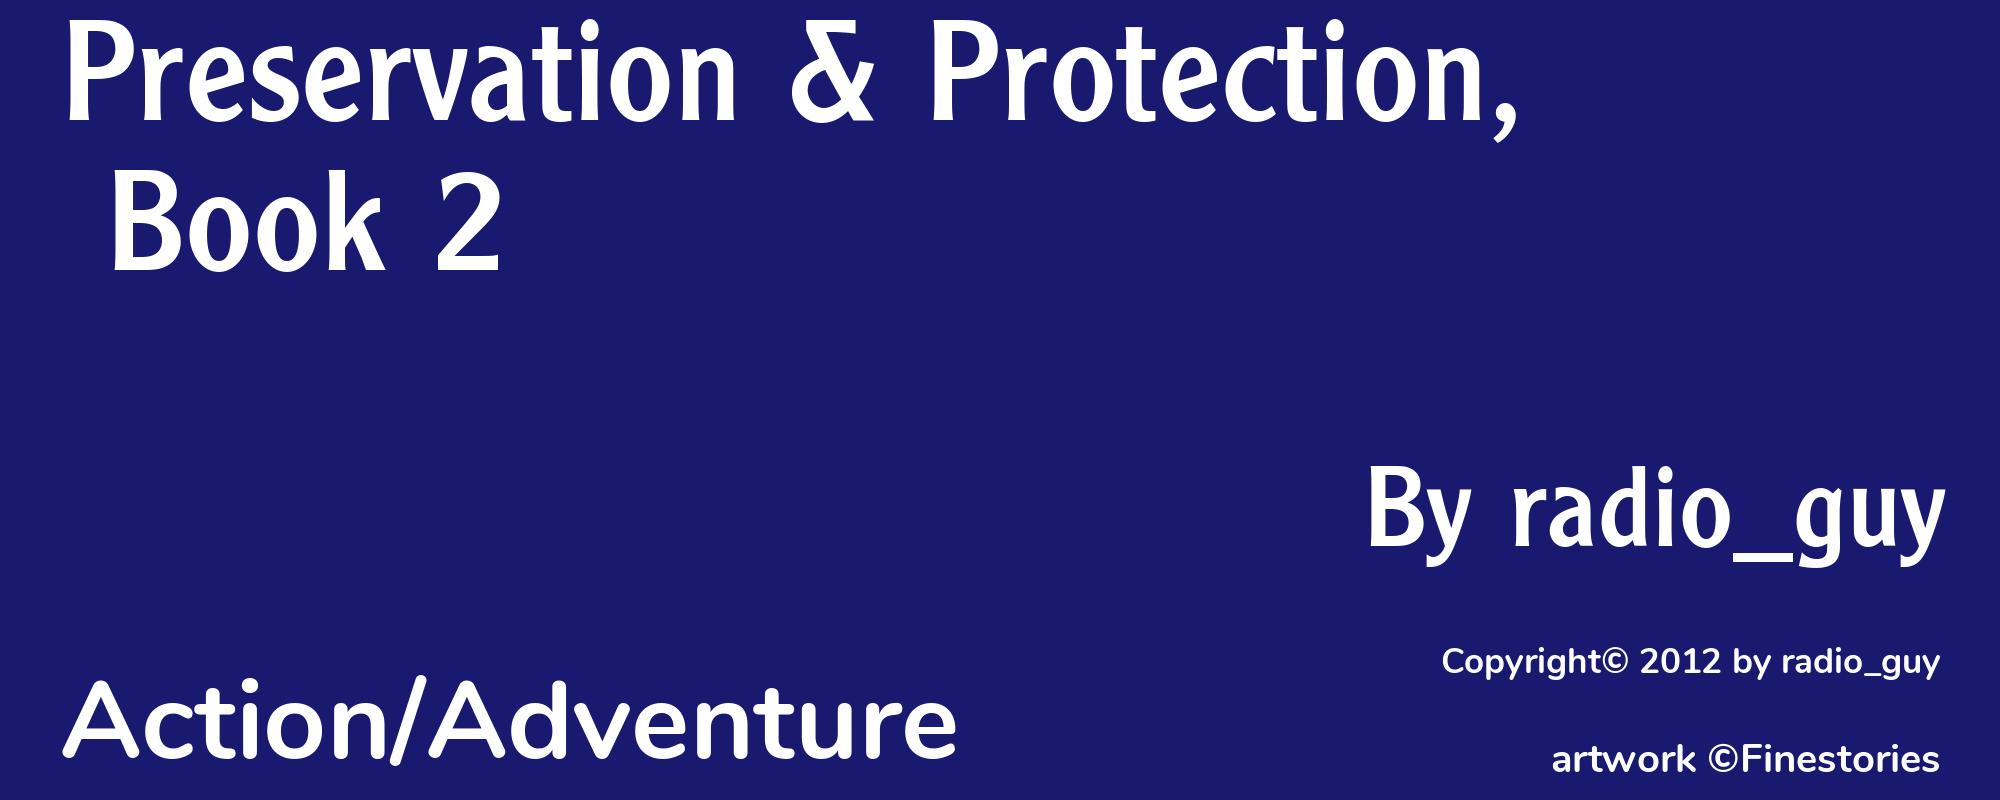 Preservation & Protection, Book 2 - Cover